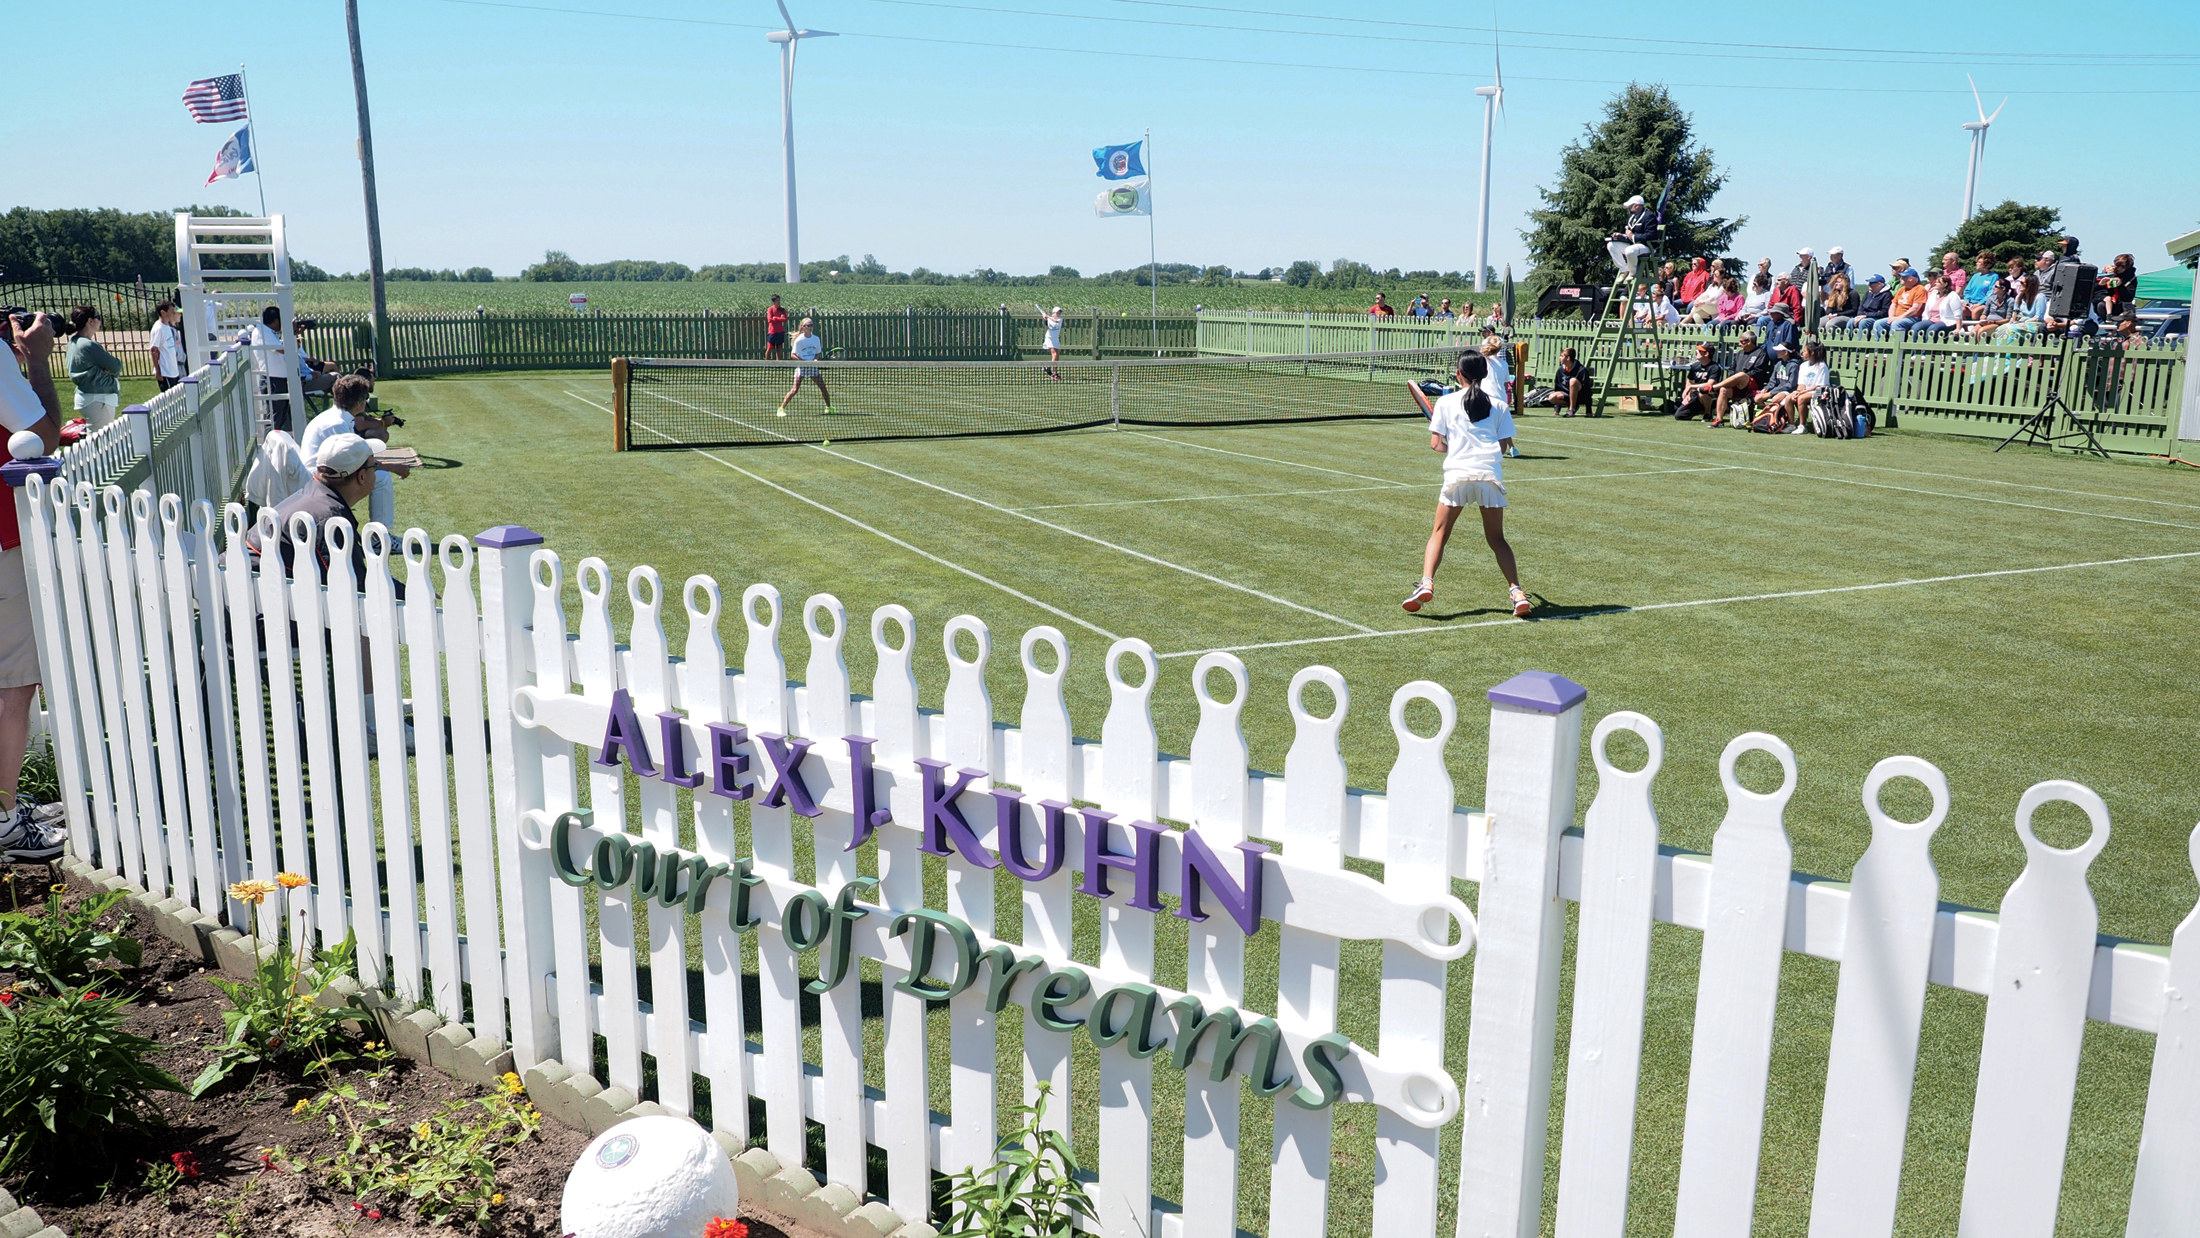 Top tennis juniors play on grass for first time at Alex Kuhn Invitational